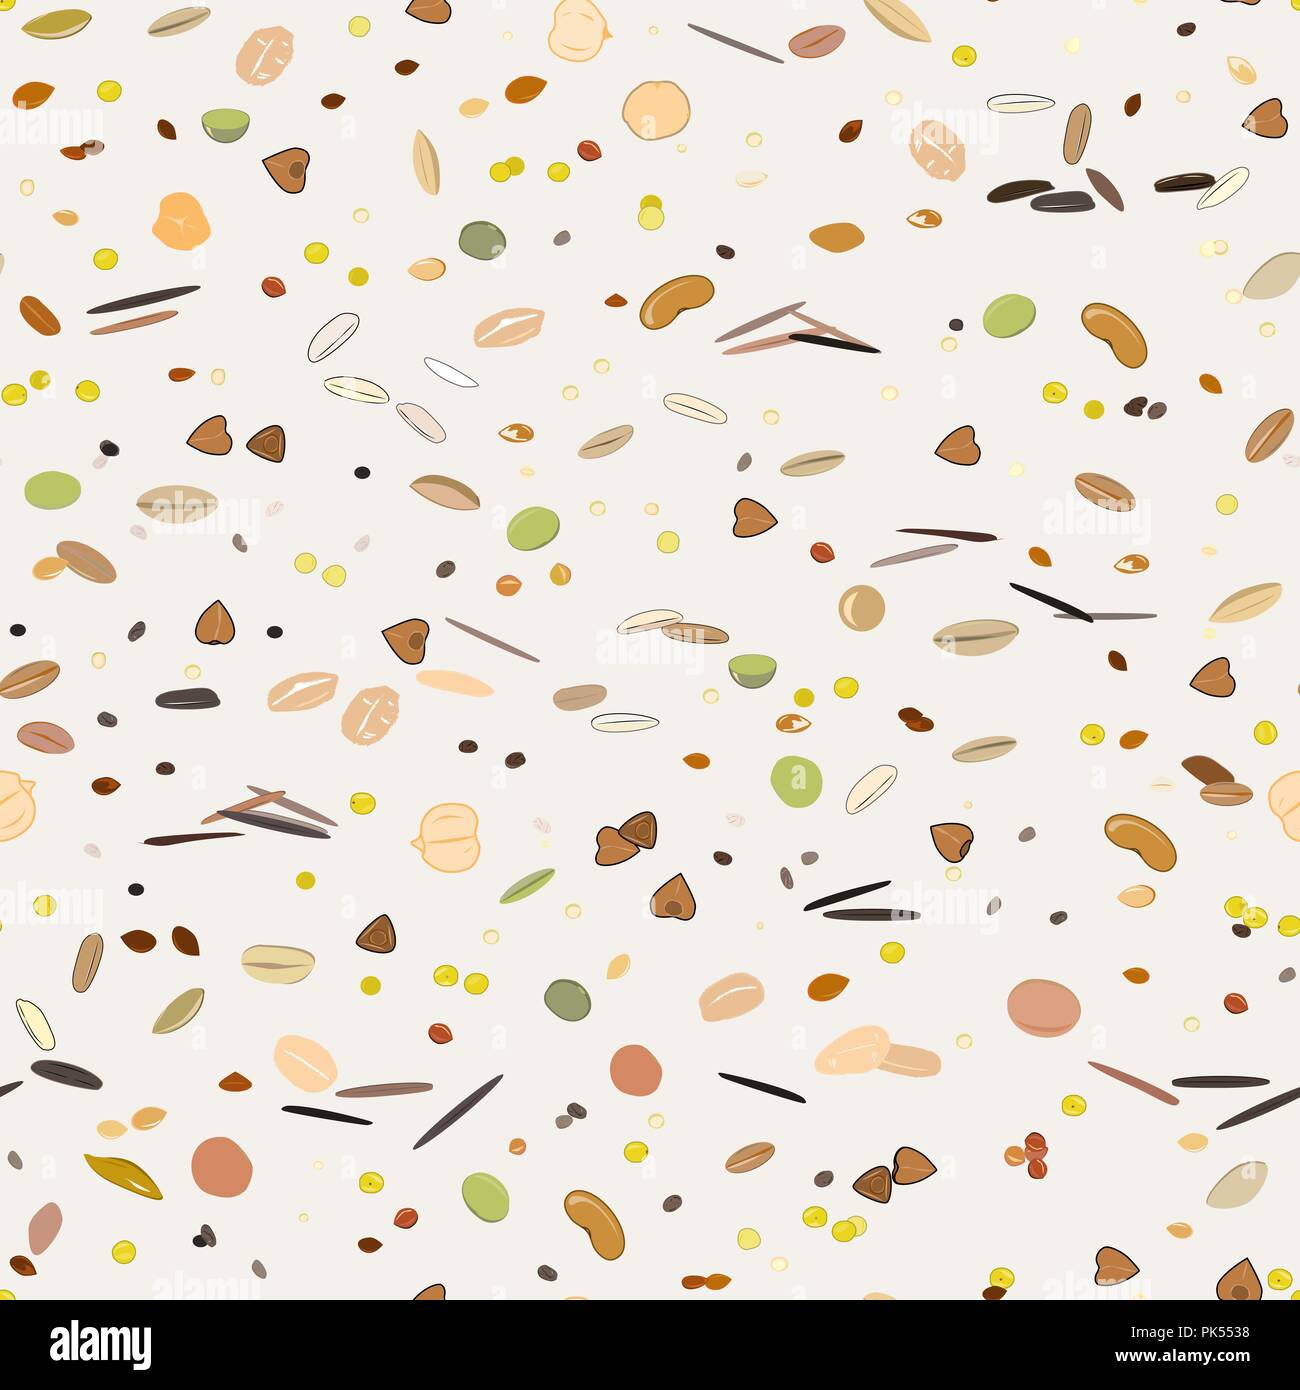 Seamless pattern with grains and cereals. Wheat, barley, oats, rye, buckwheat, amaranth, rice, millet, sorghum, quinoa, chia, oatmeal and legumes. Vec Stock Vector